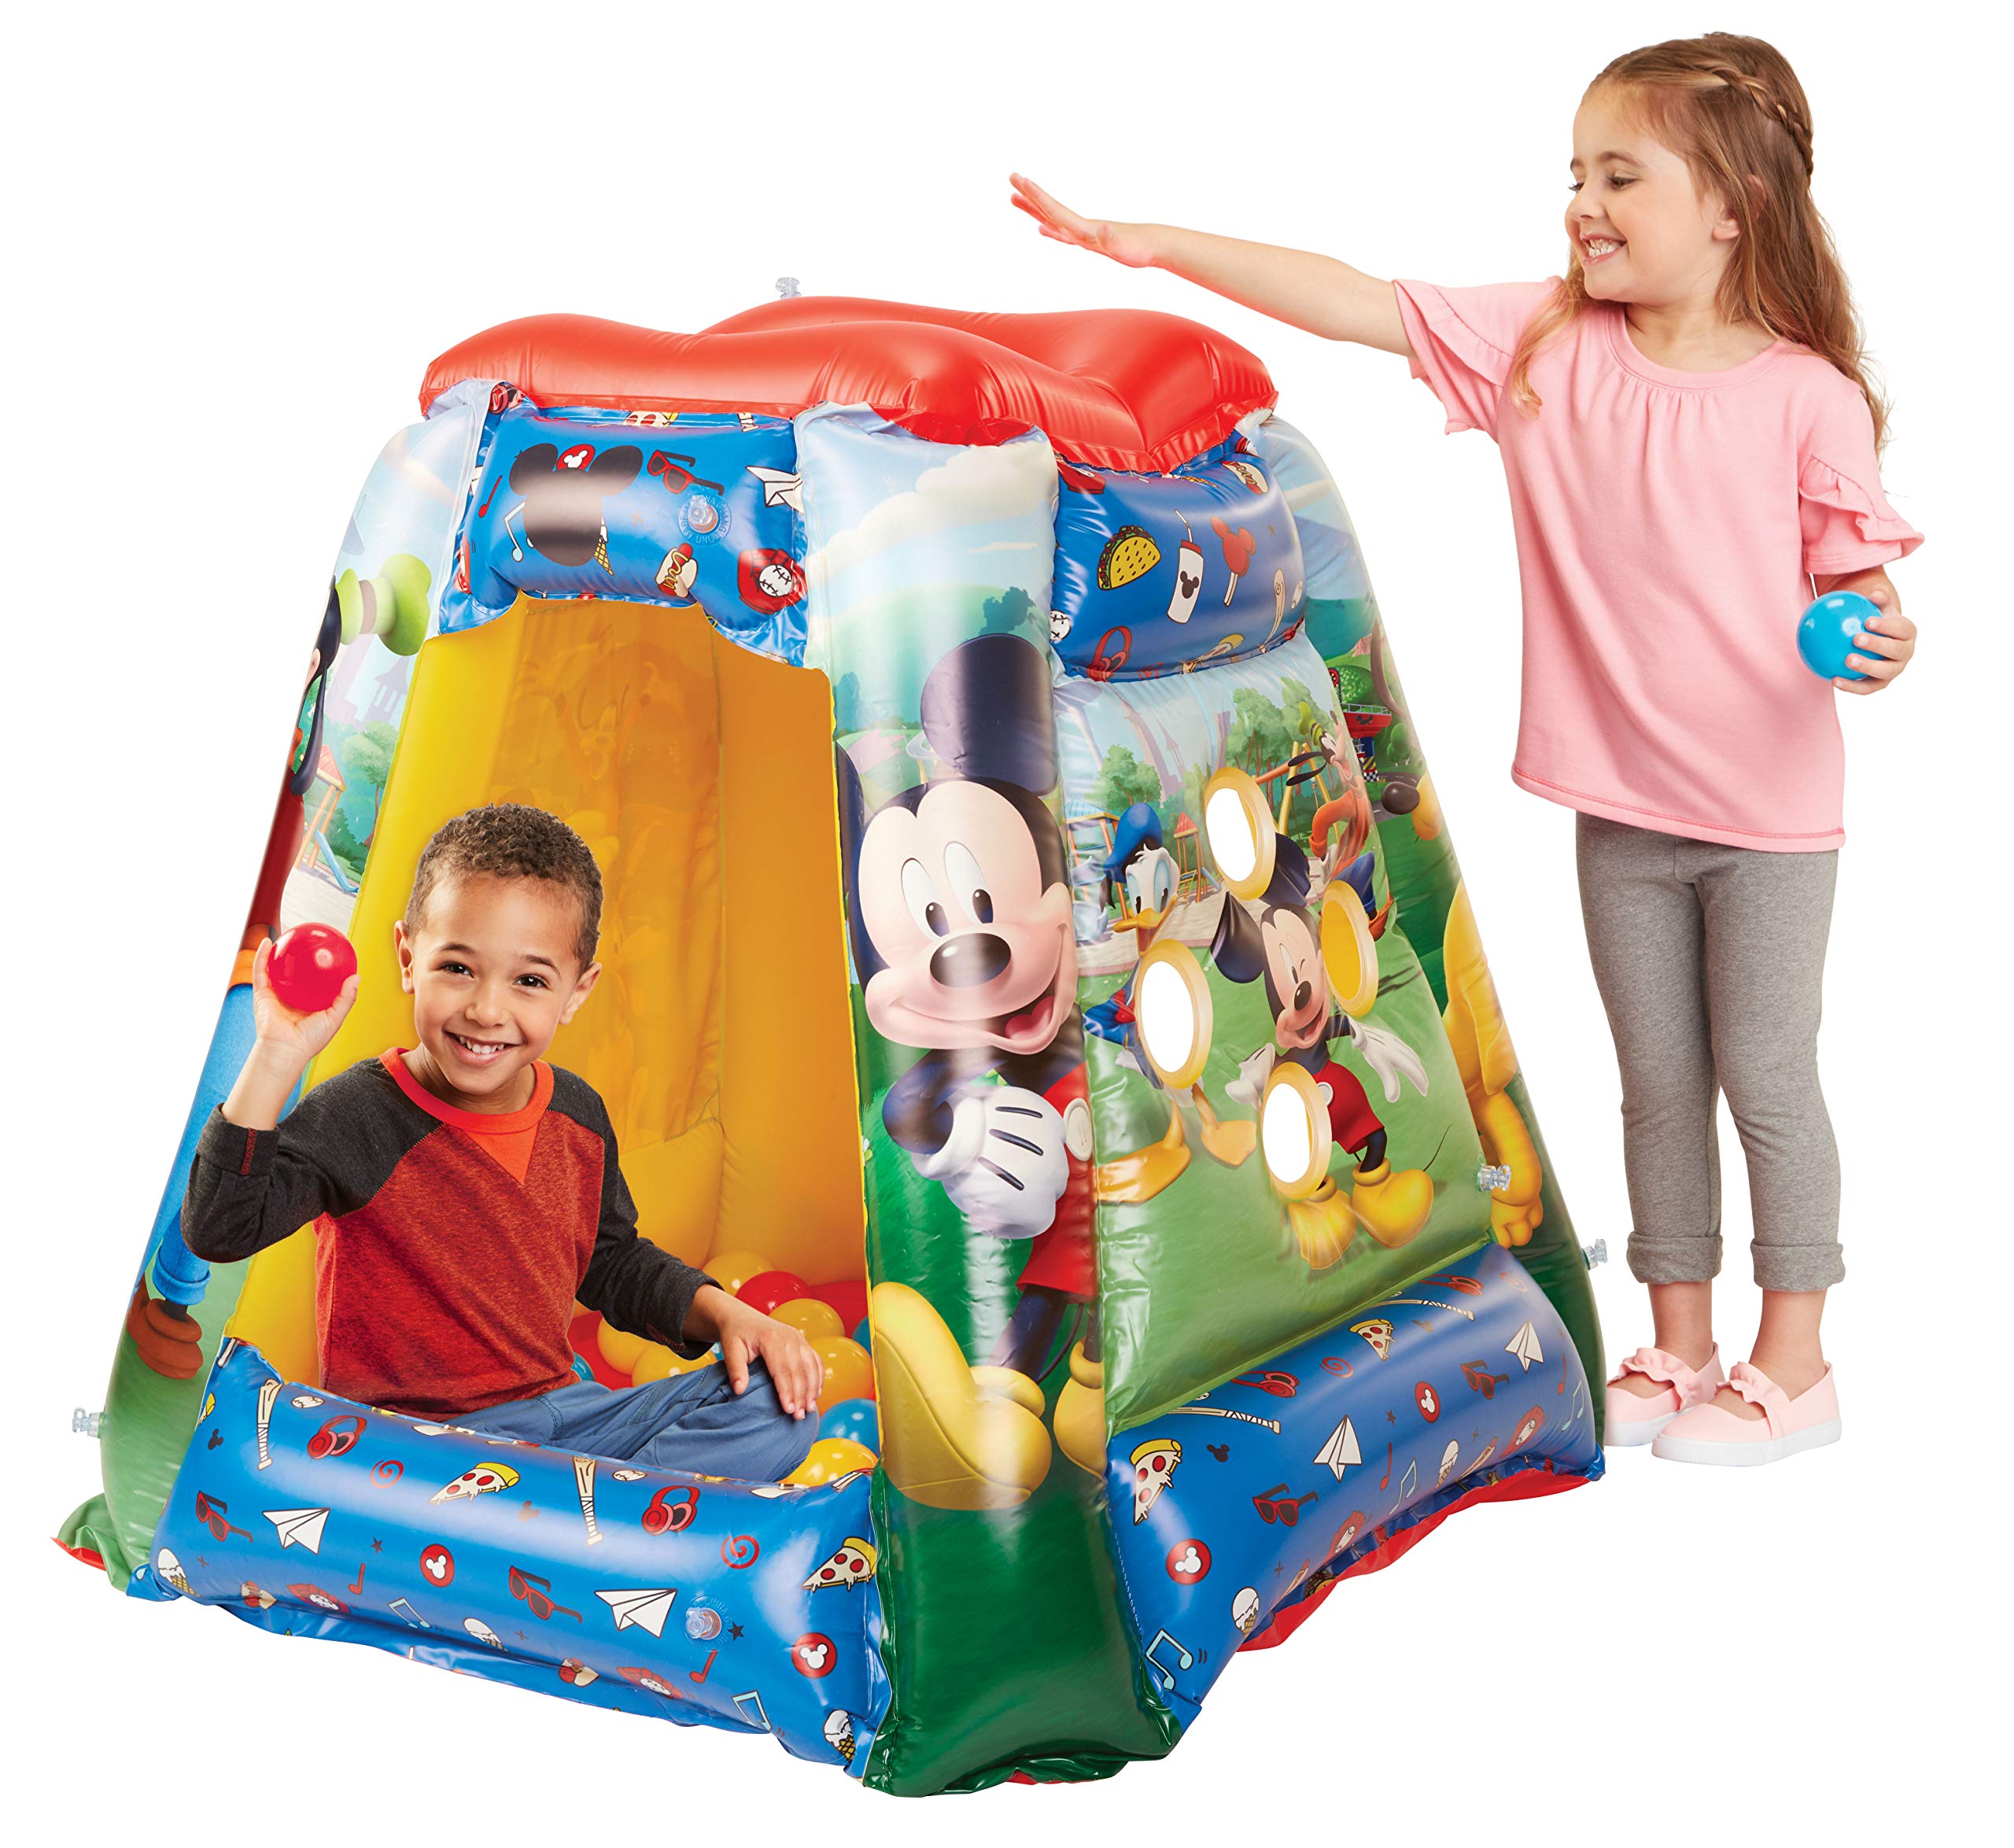 Disney Minnie Mouse Inflatable Playland Ball Pit 100 Soft Flex Balls for sale online 